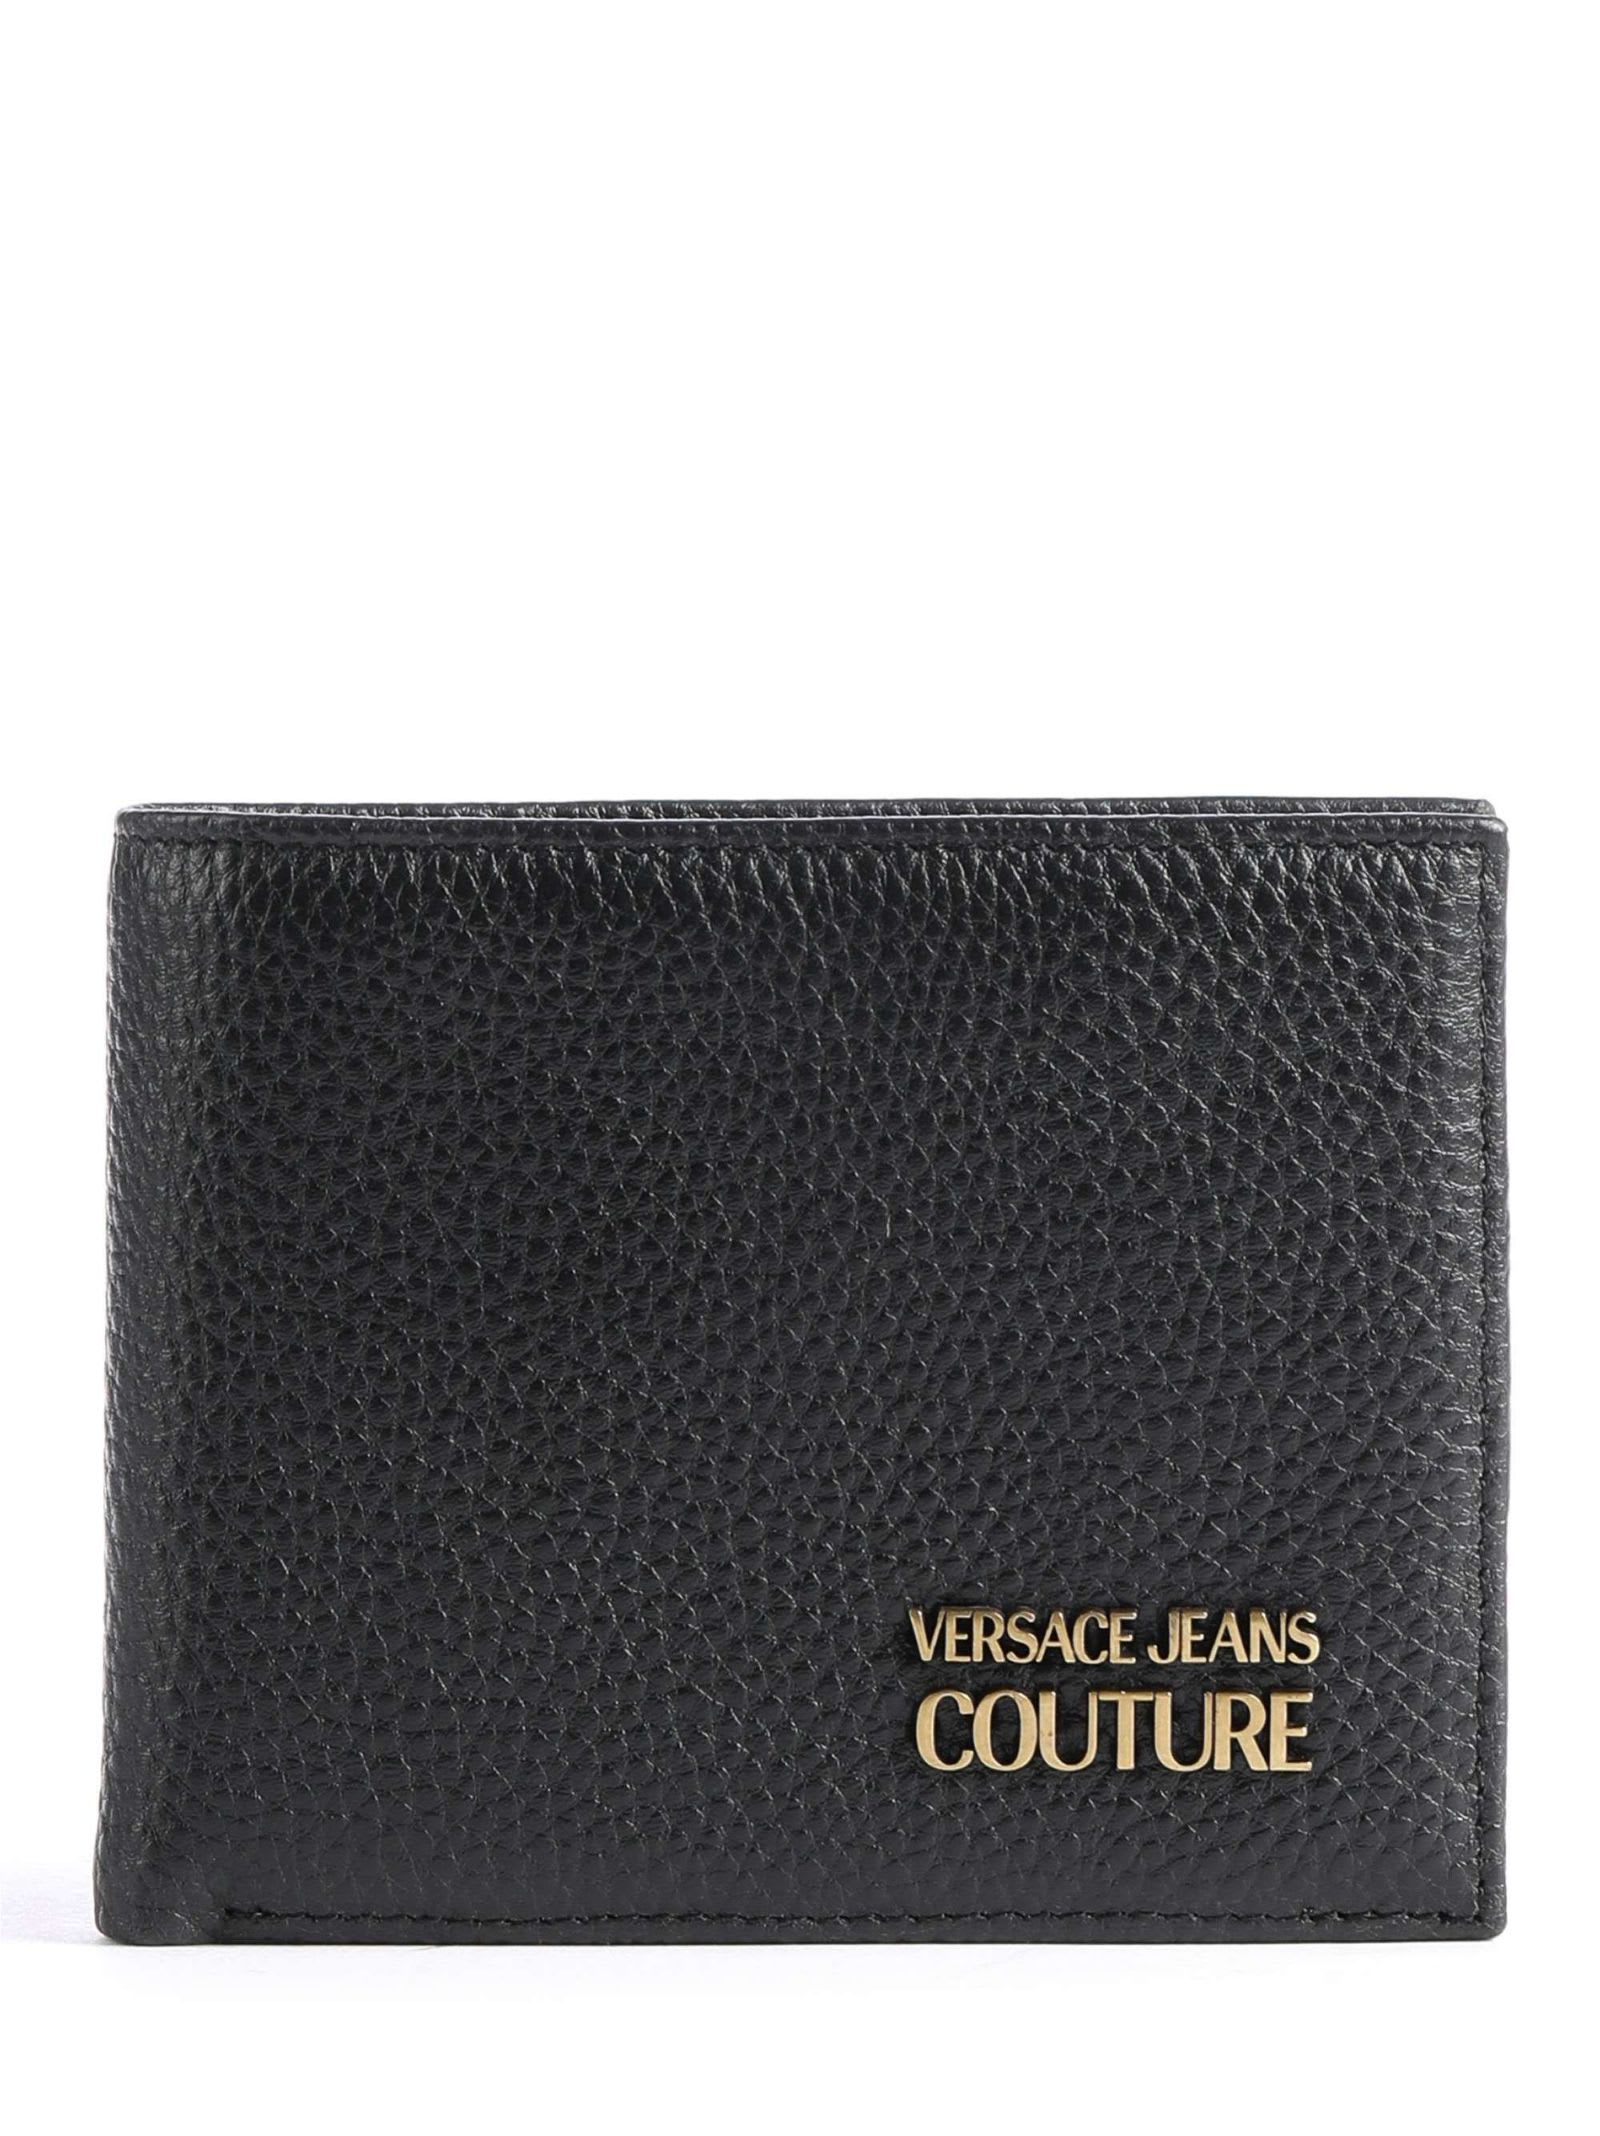 Versace Jeans Couture Small Leather Goods In Black